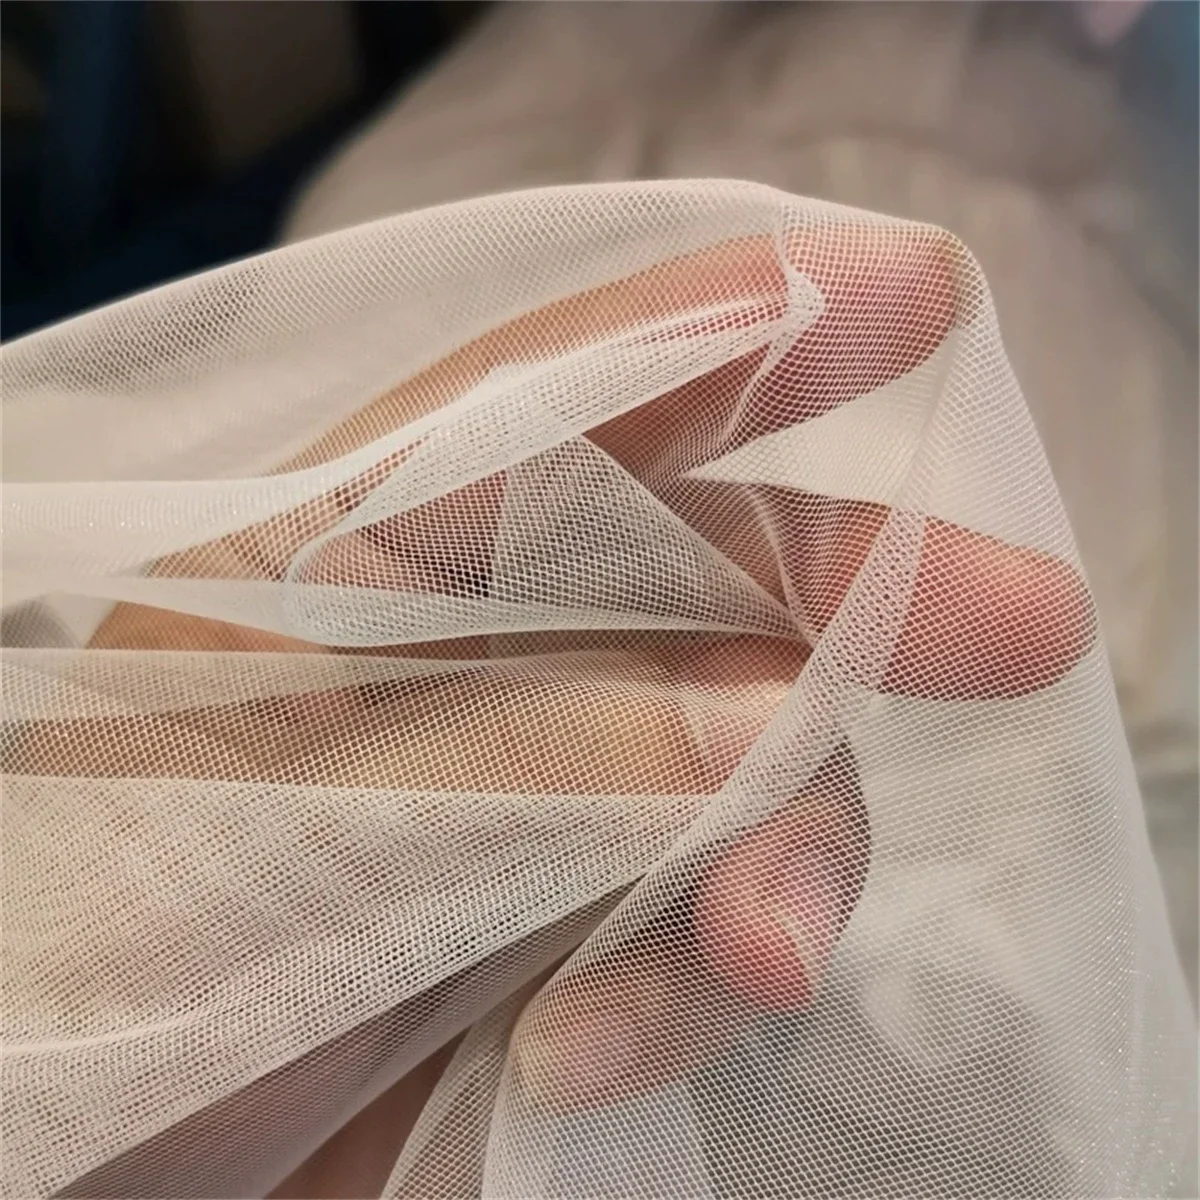 High Quality Soft Mesh Sheer Tulle Fabric Swiss Tulle for Bridal Veil Illusion Wedding Dress White Ivory Beige Black 150cm images - 6